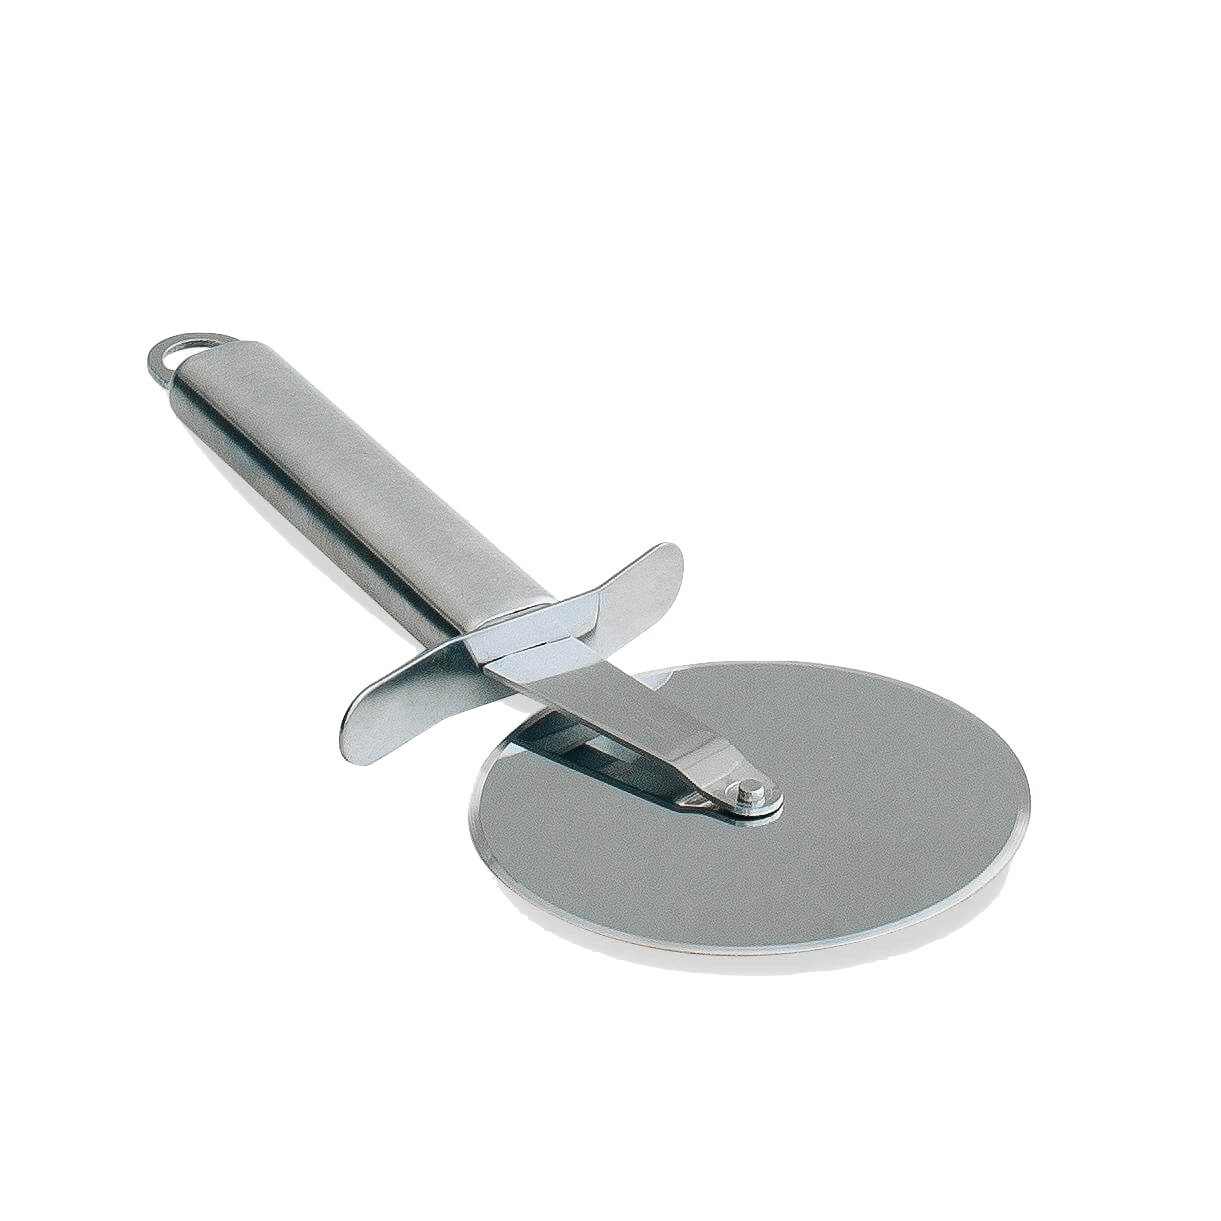 Large wheel style pizza cutting roller